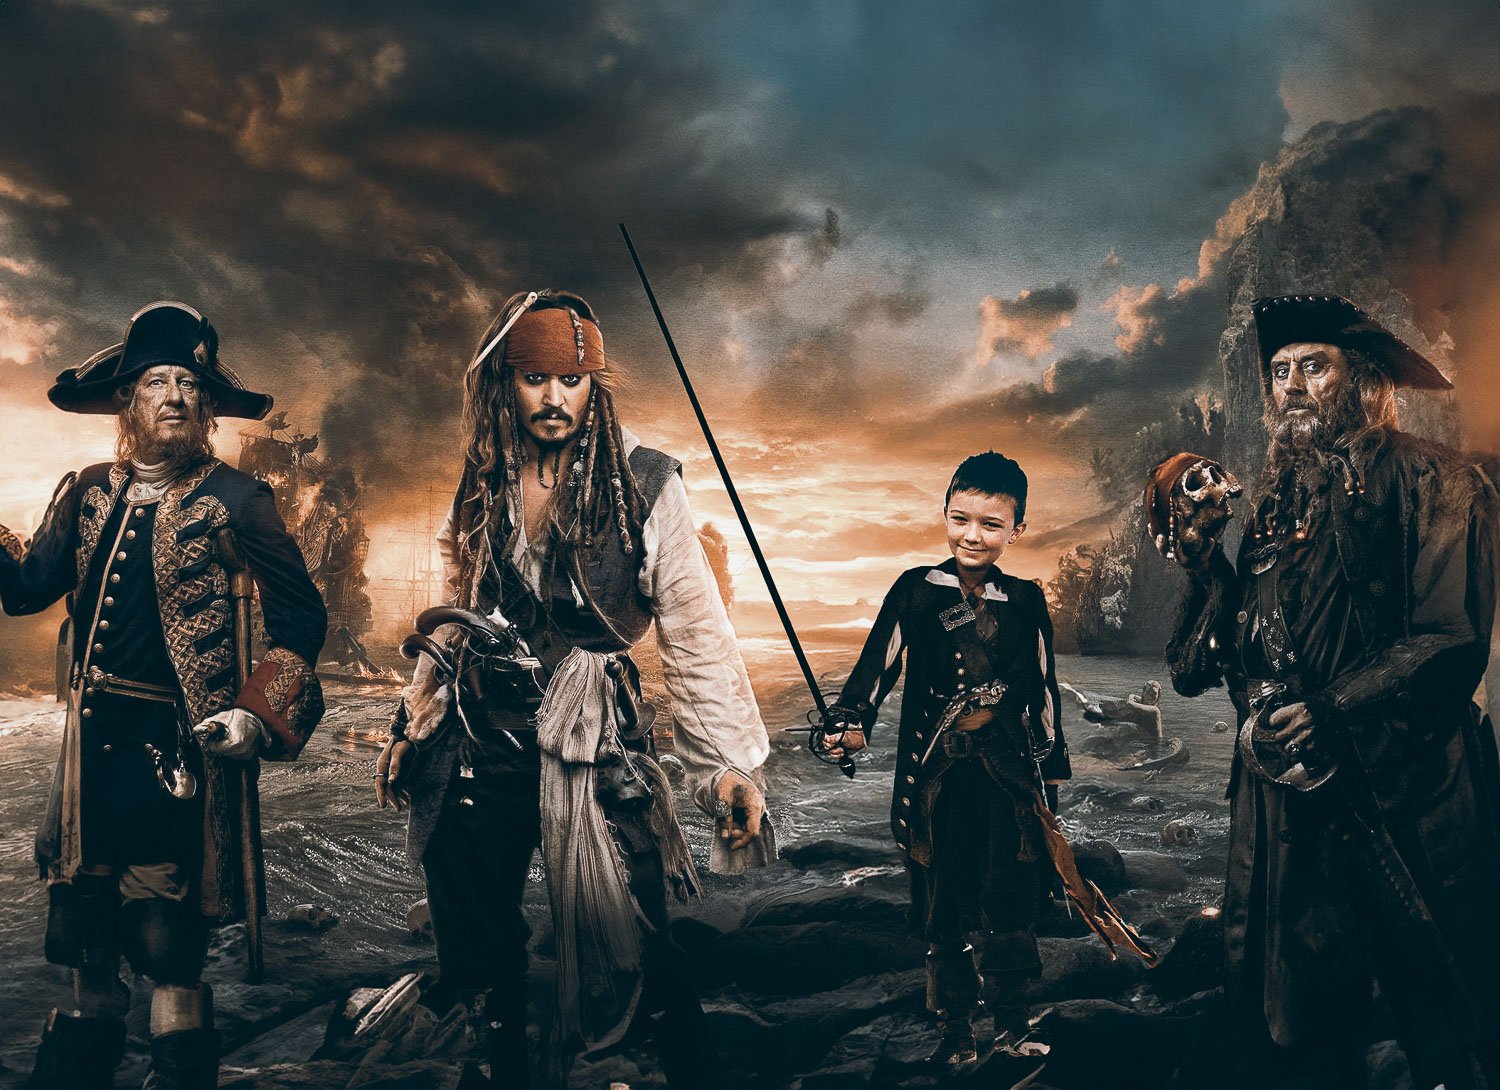 Young boy dressed as a pirate standing with three pirates